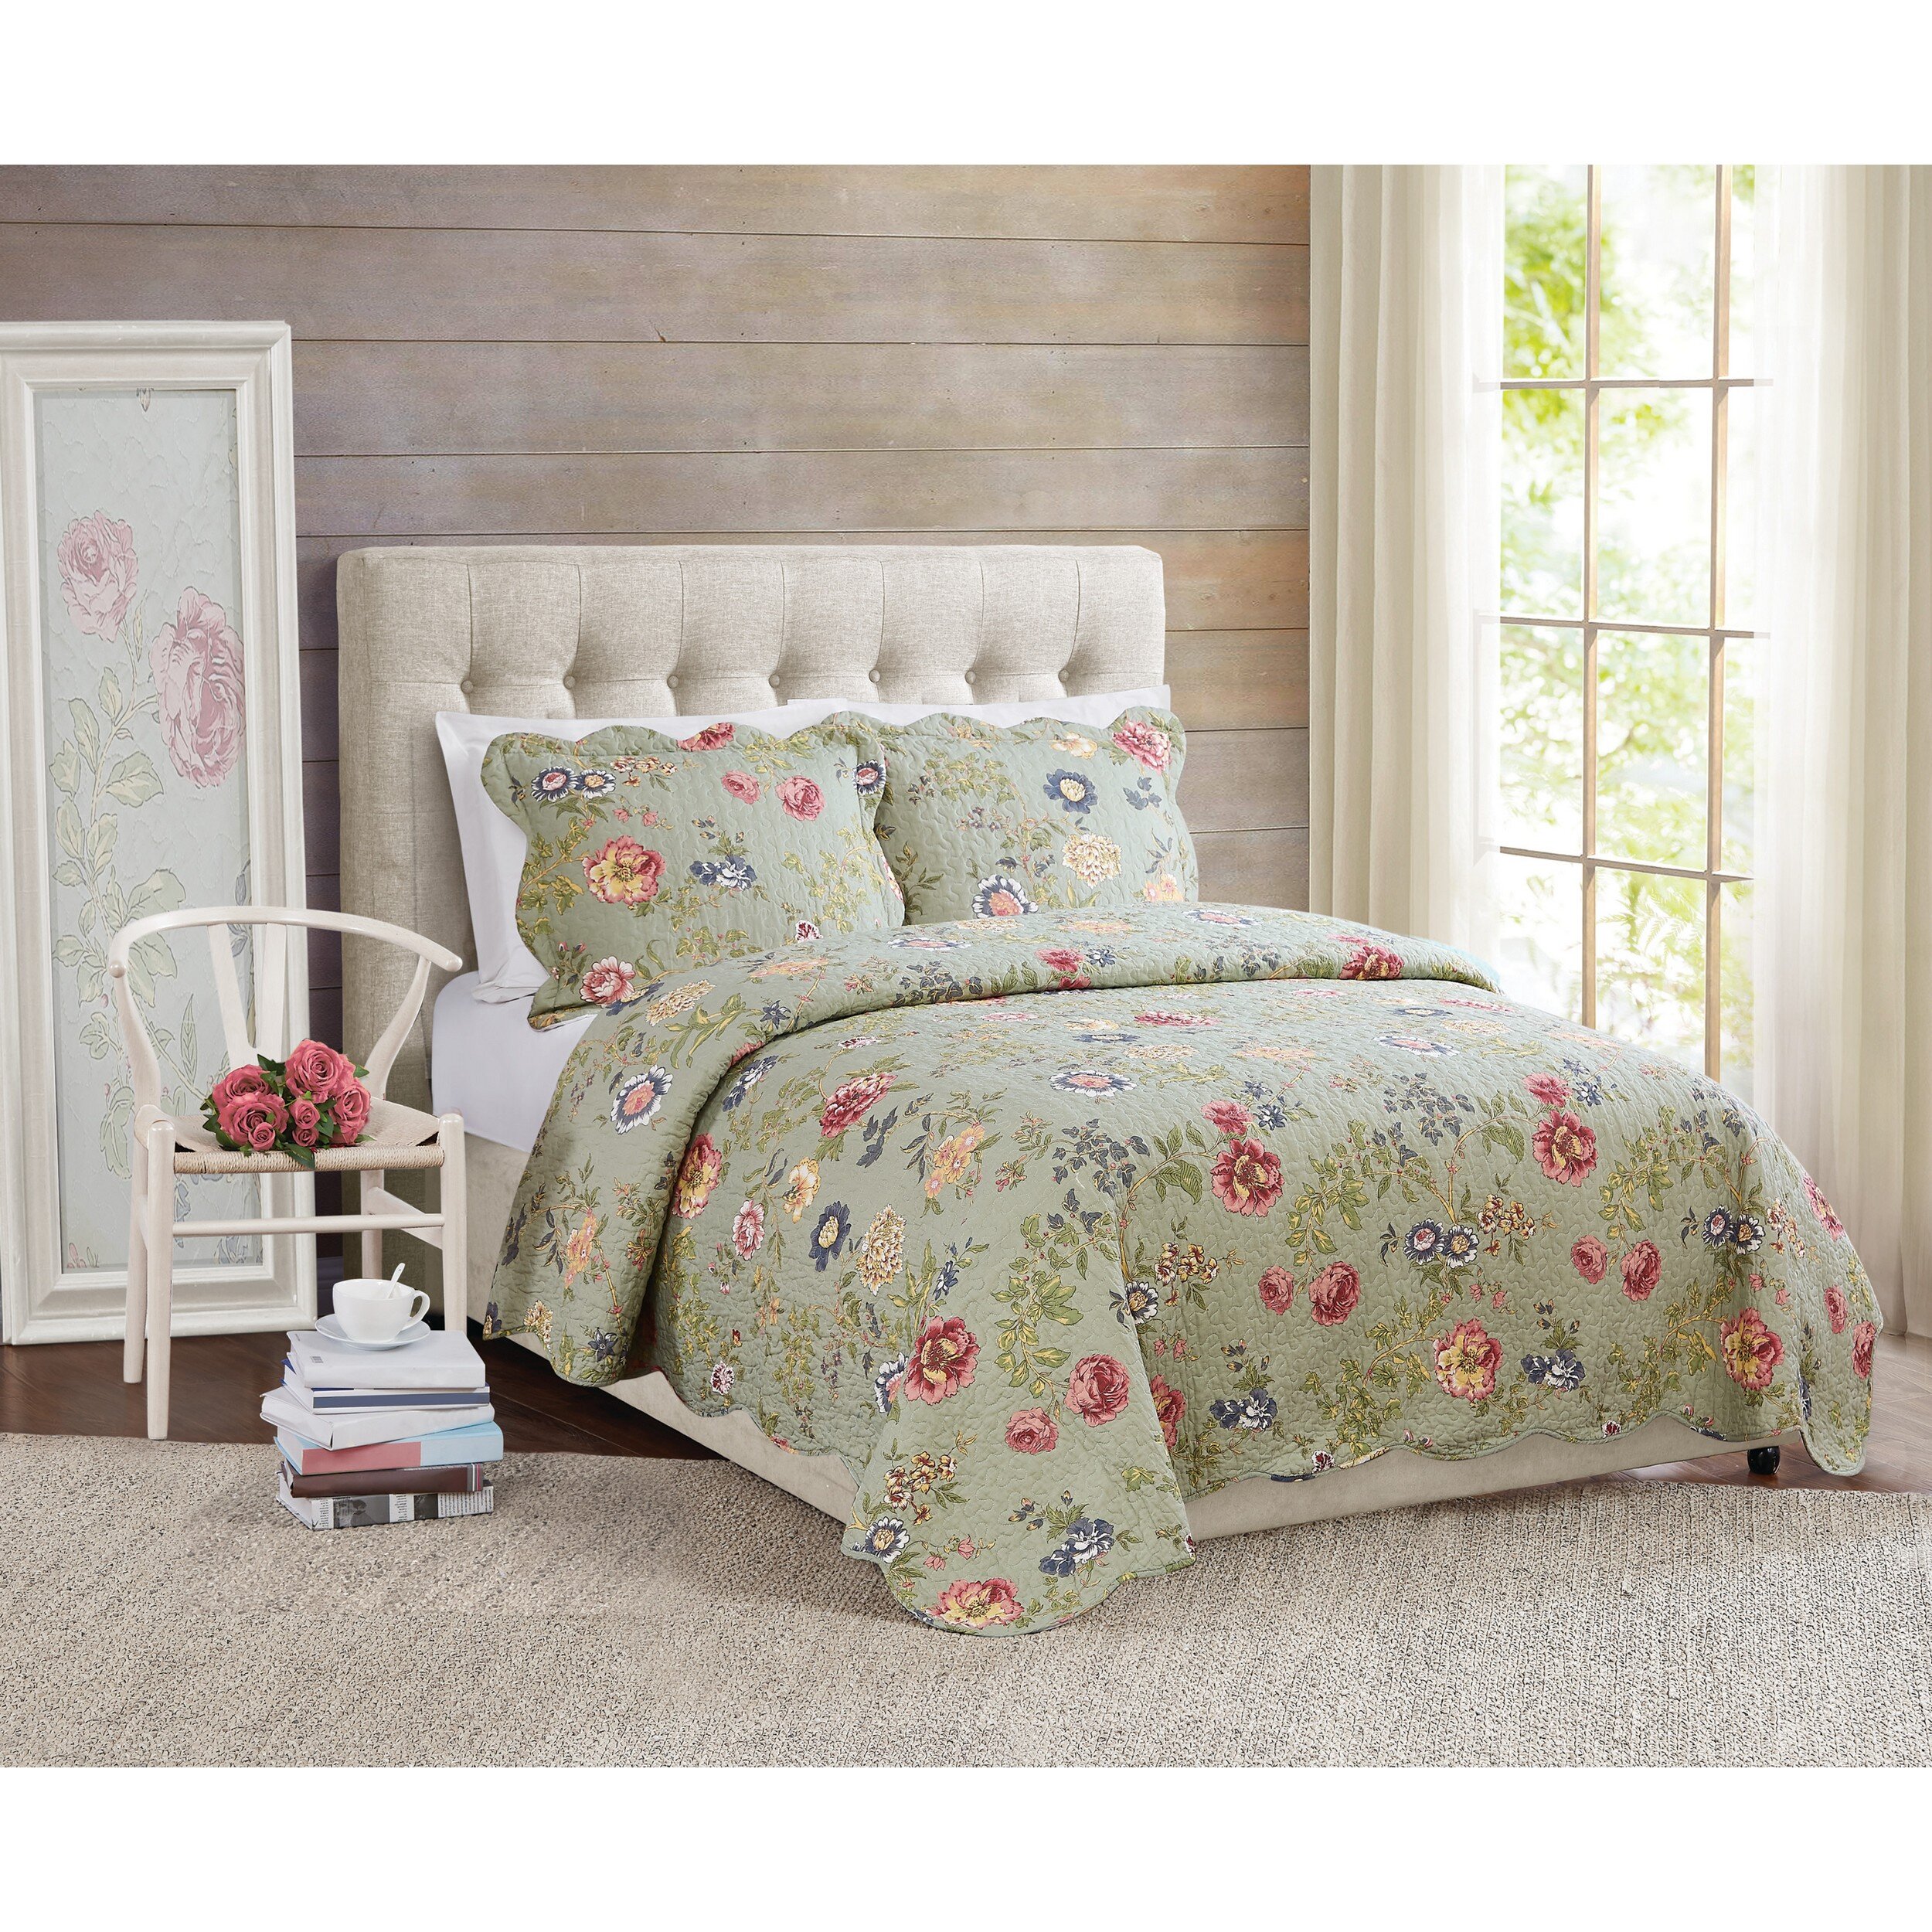 American Traditions Edens Garden Traditional Cotton Floral Quilt